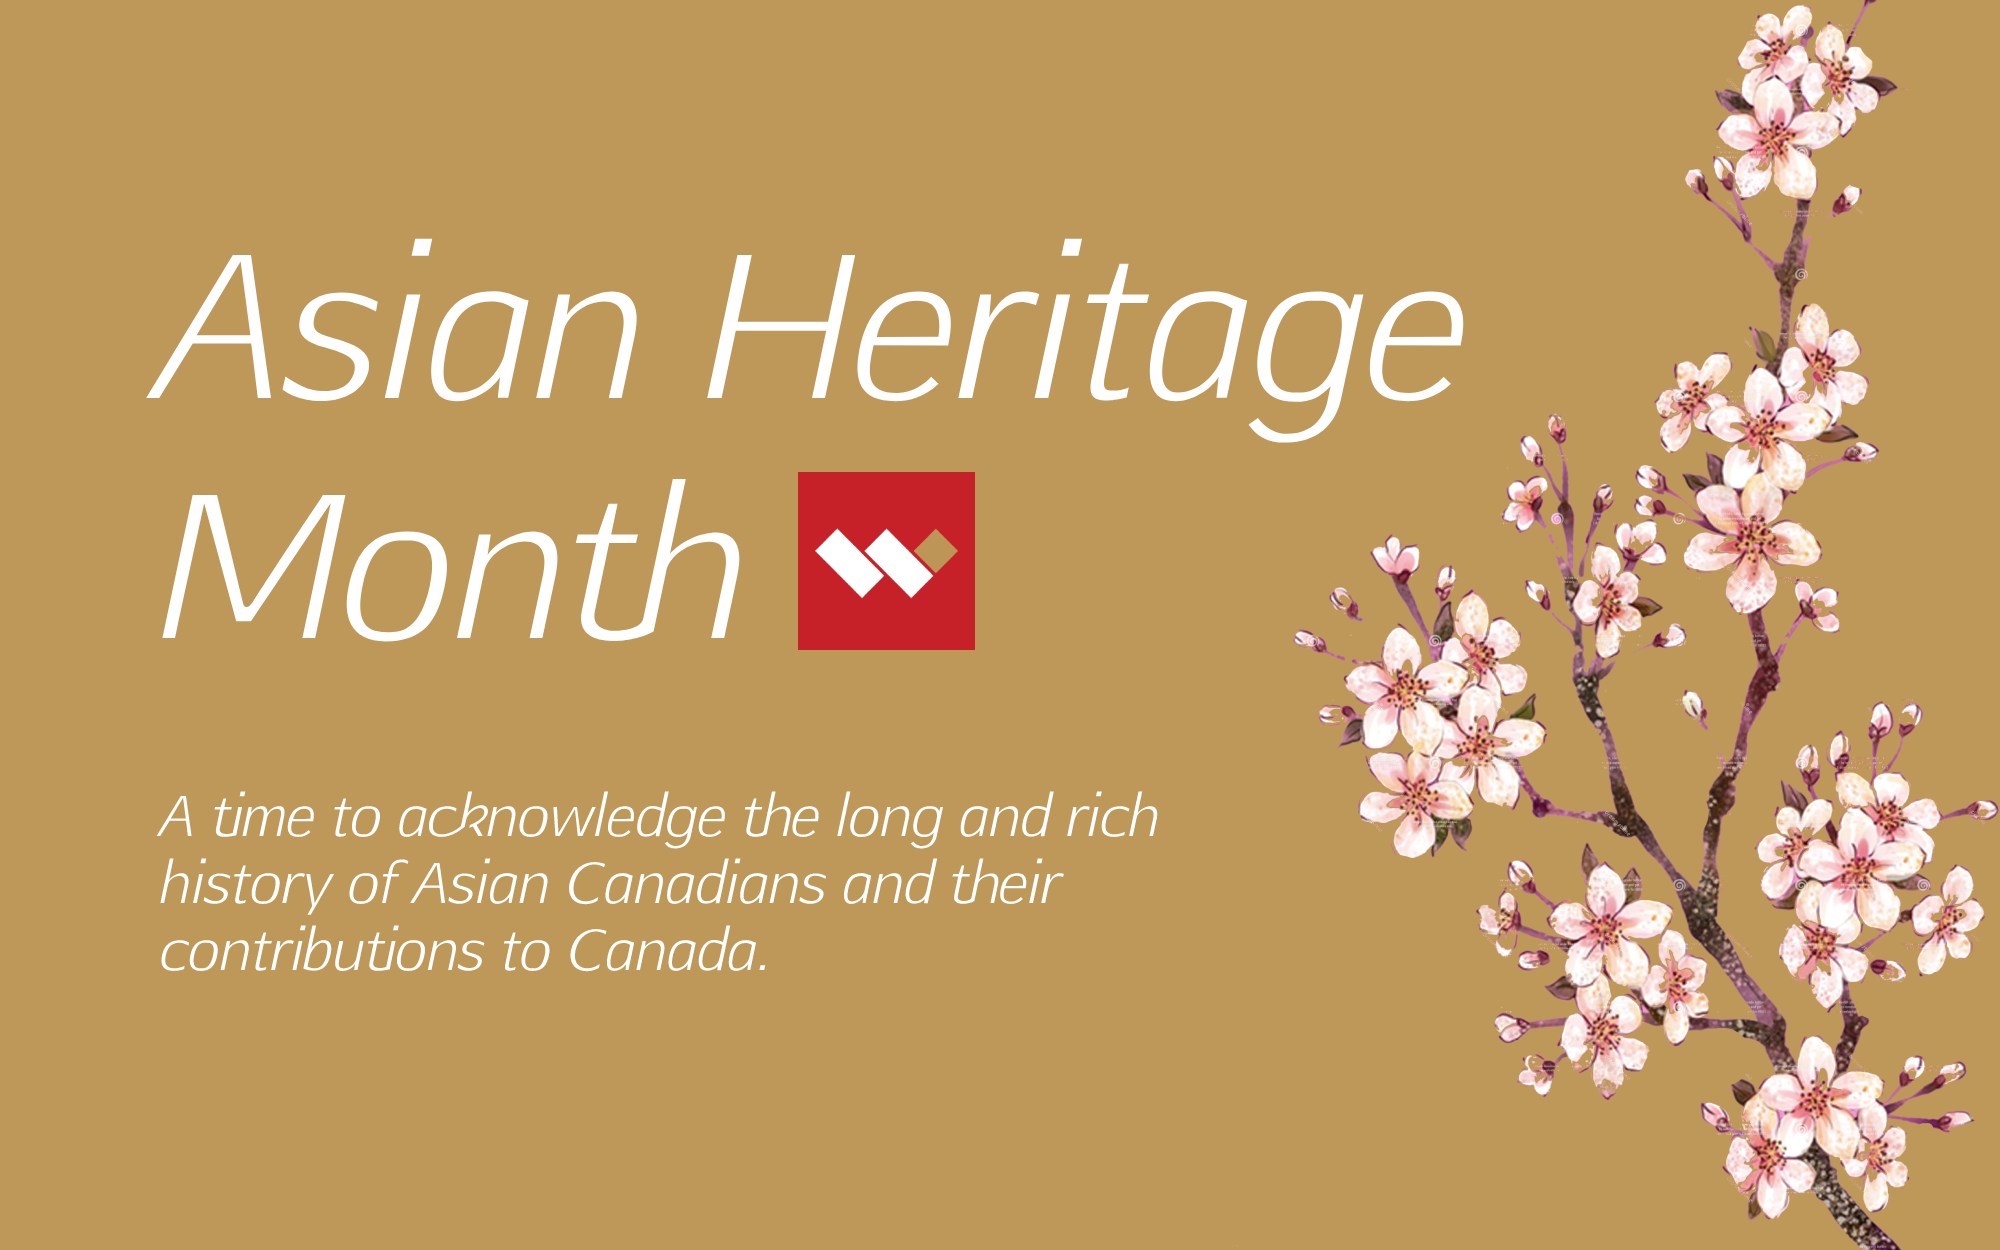 Asian Heritage Month greeting card with pink blossoms and bank logo on it